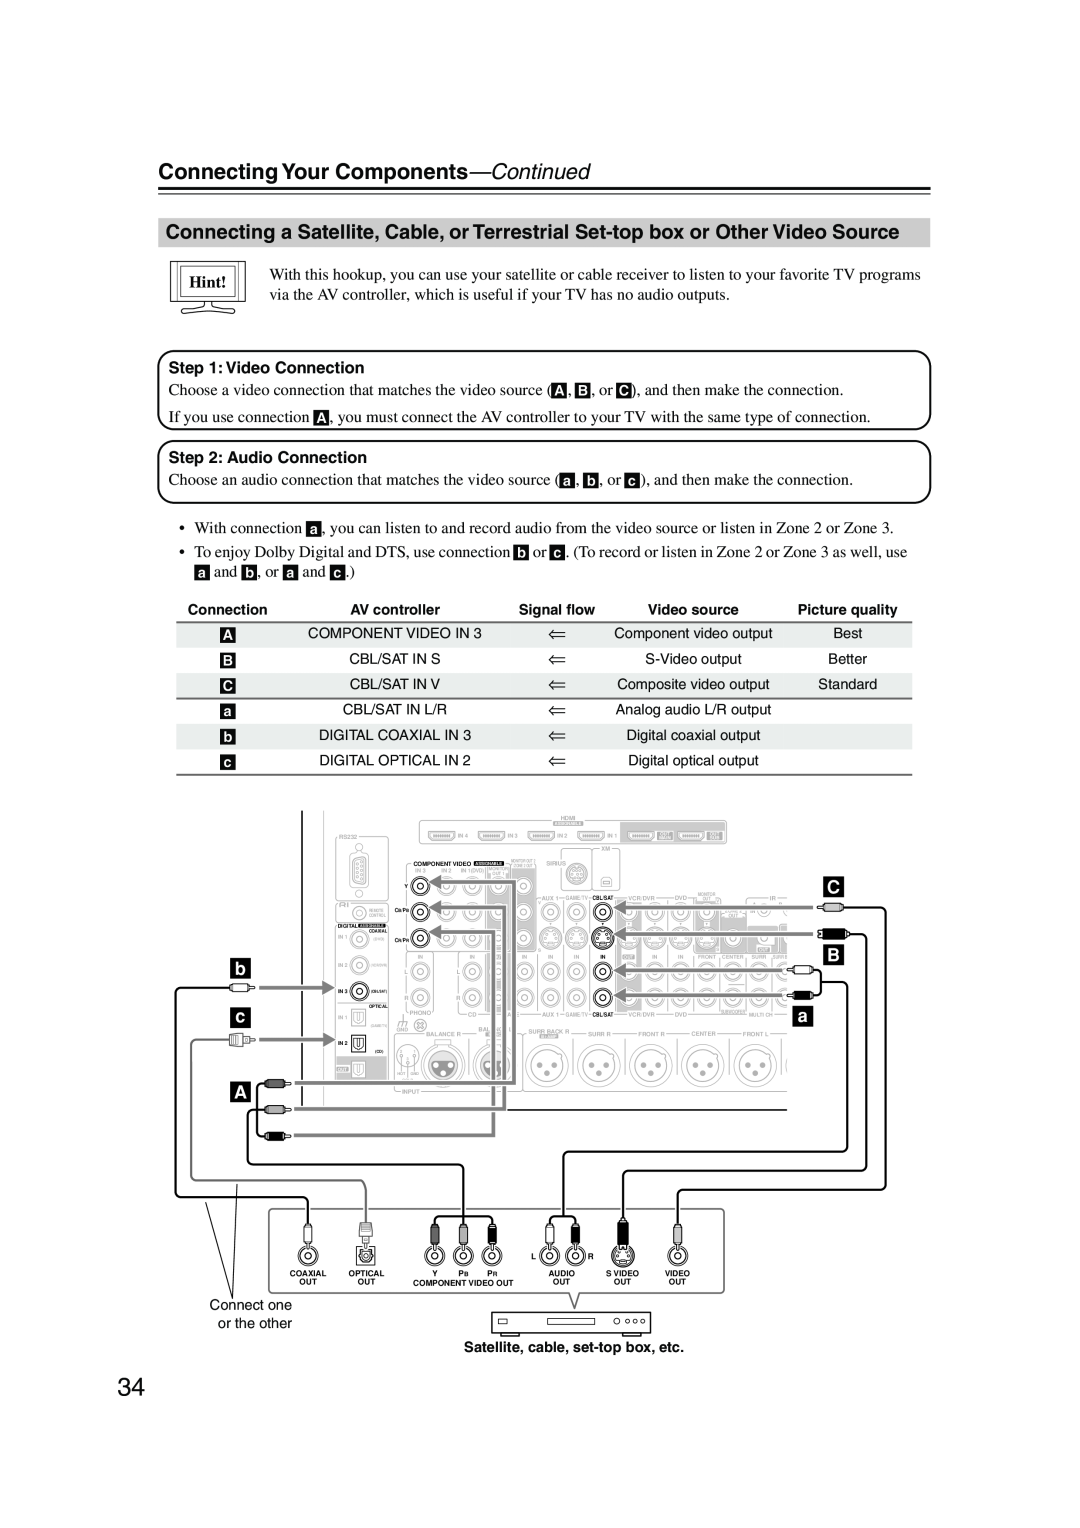 Onkyo PR-SC885 instruction manual Connecting Your Components—Continued, b c A, Hint, Satellite, cable, set-topbox, etc 